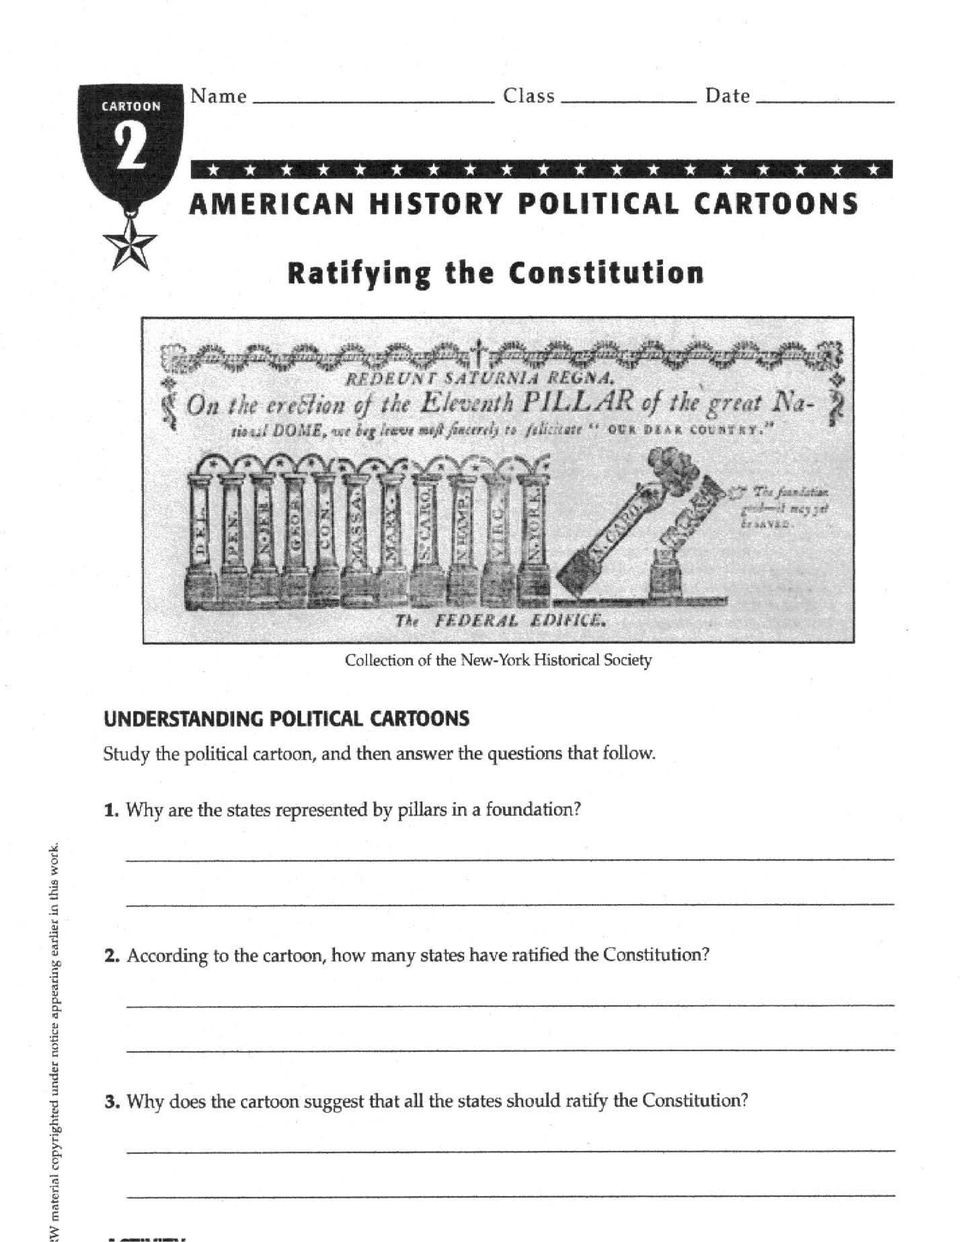 Ratifying the Constitution Worksheet Answers to Ratify or Not to Ratify Federalists V Anti Federalists